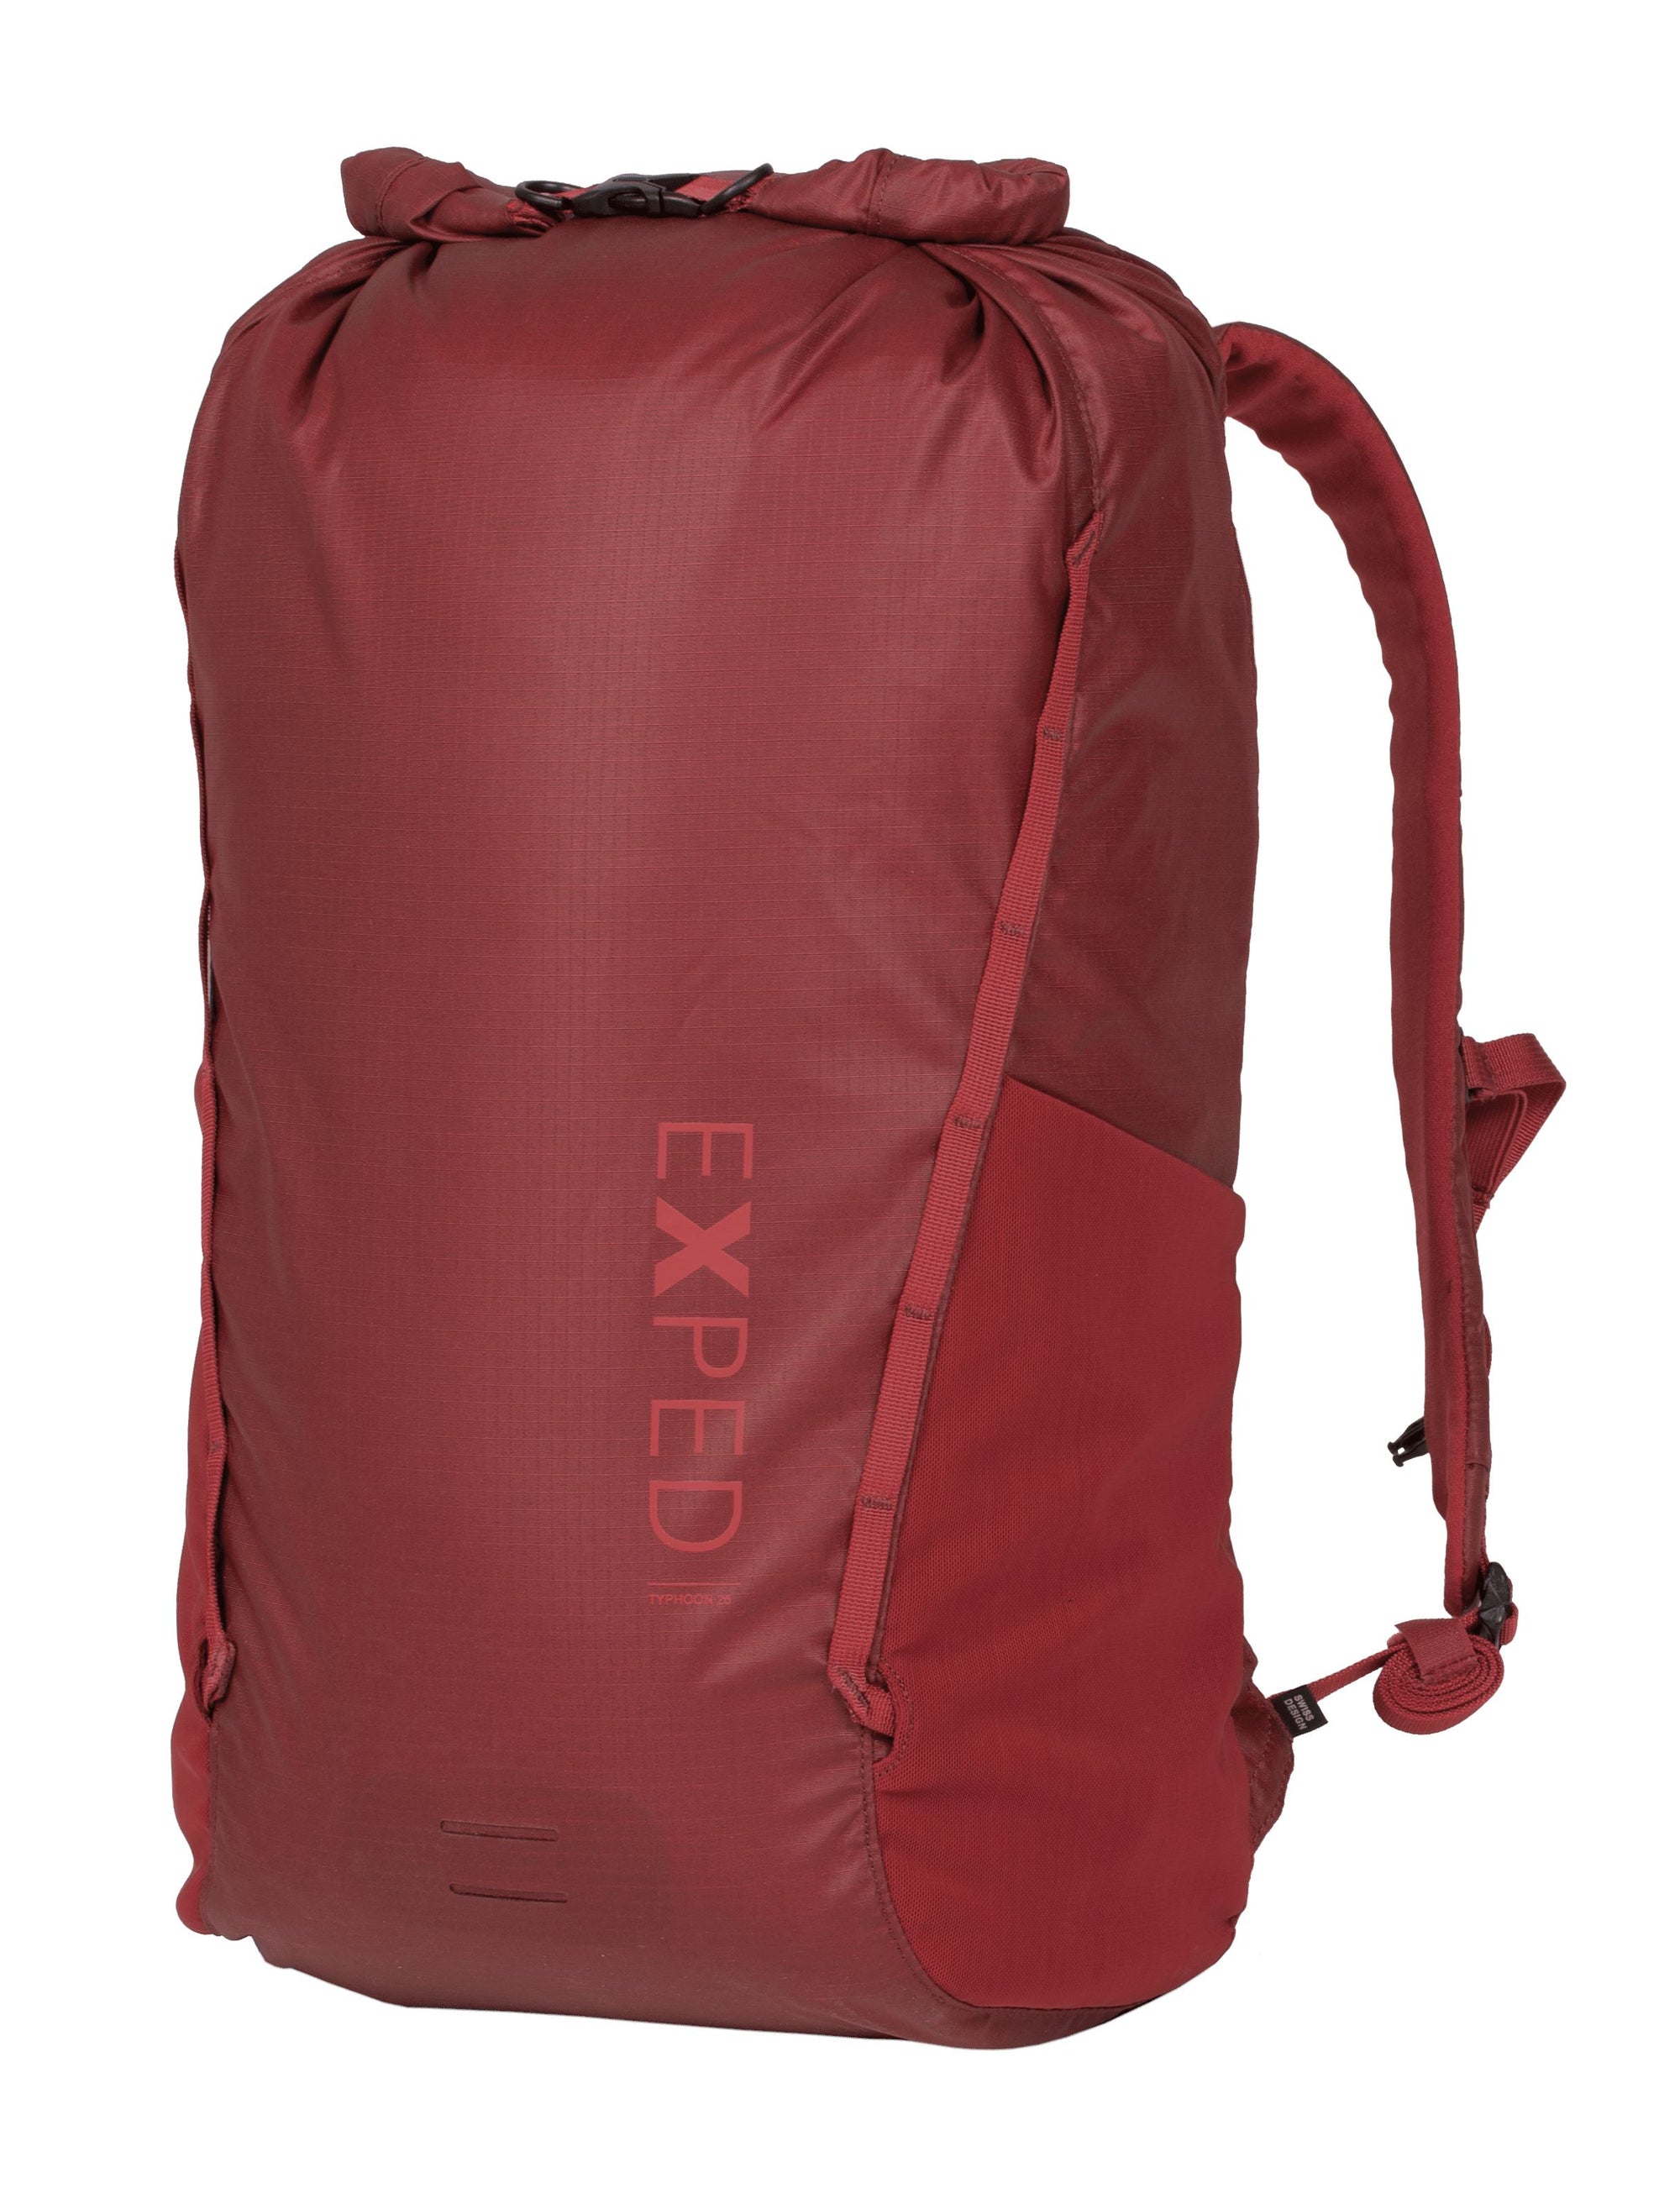 EXPED Typhoon 25 Backpack Black 